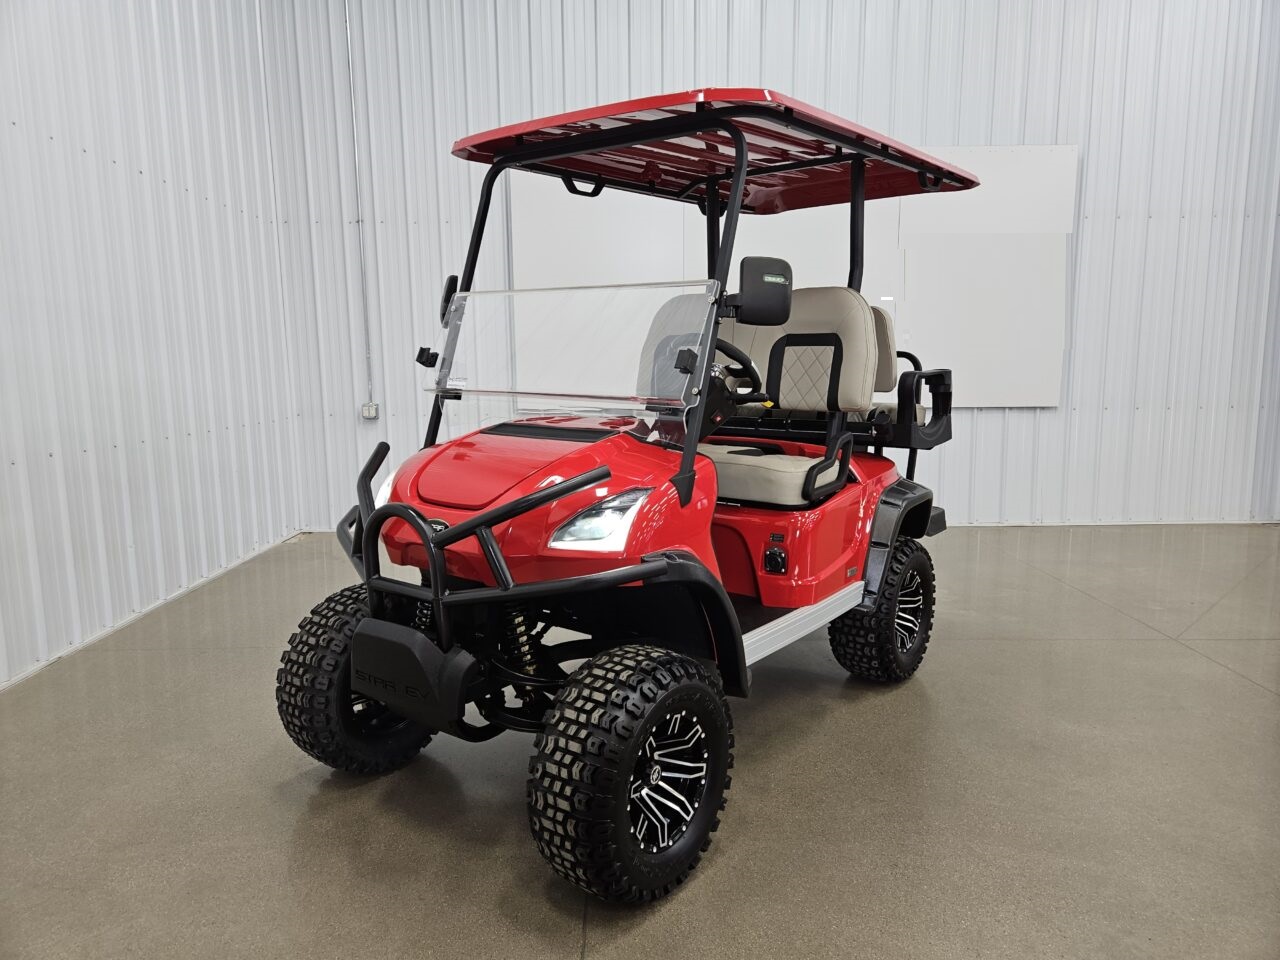 2022 Star EV Sirius 2+2 Lithium Ion Golf Cart LSV Torch Red For Sale now